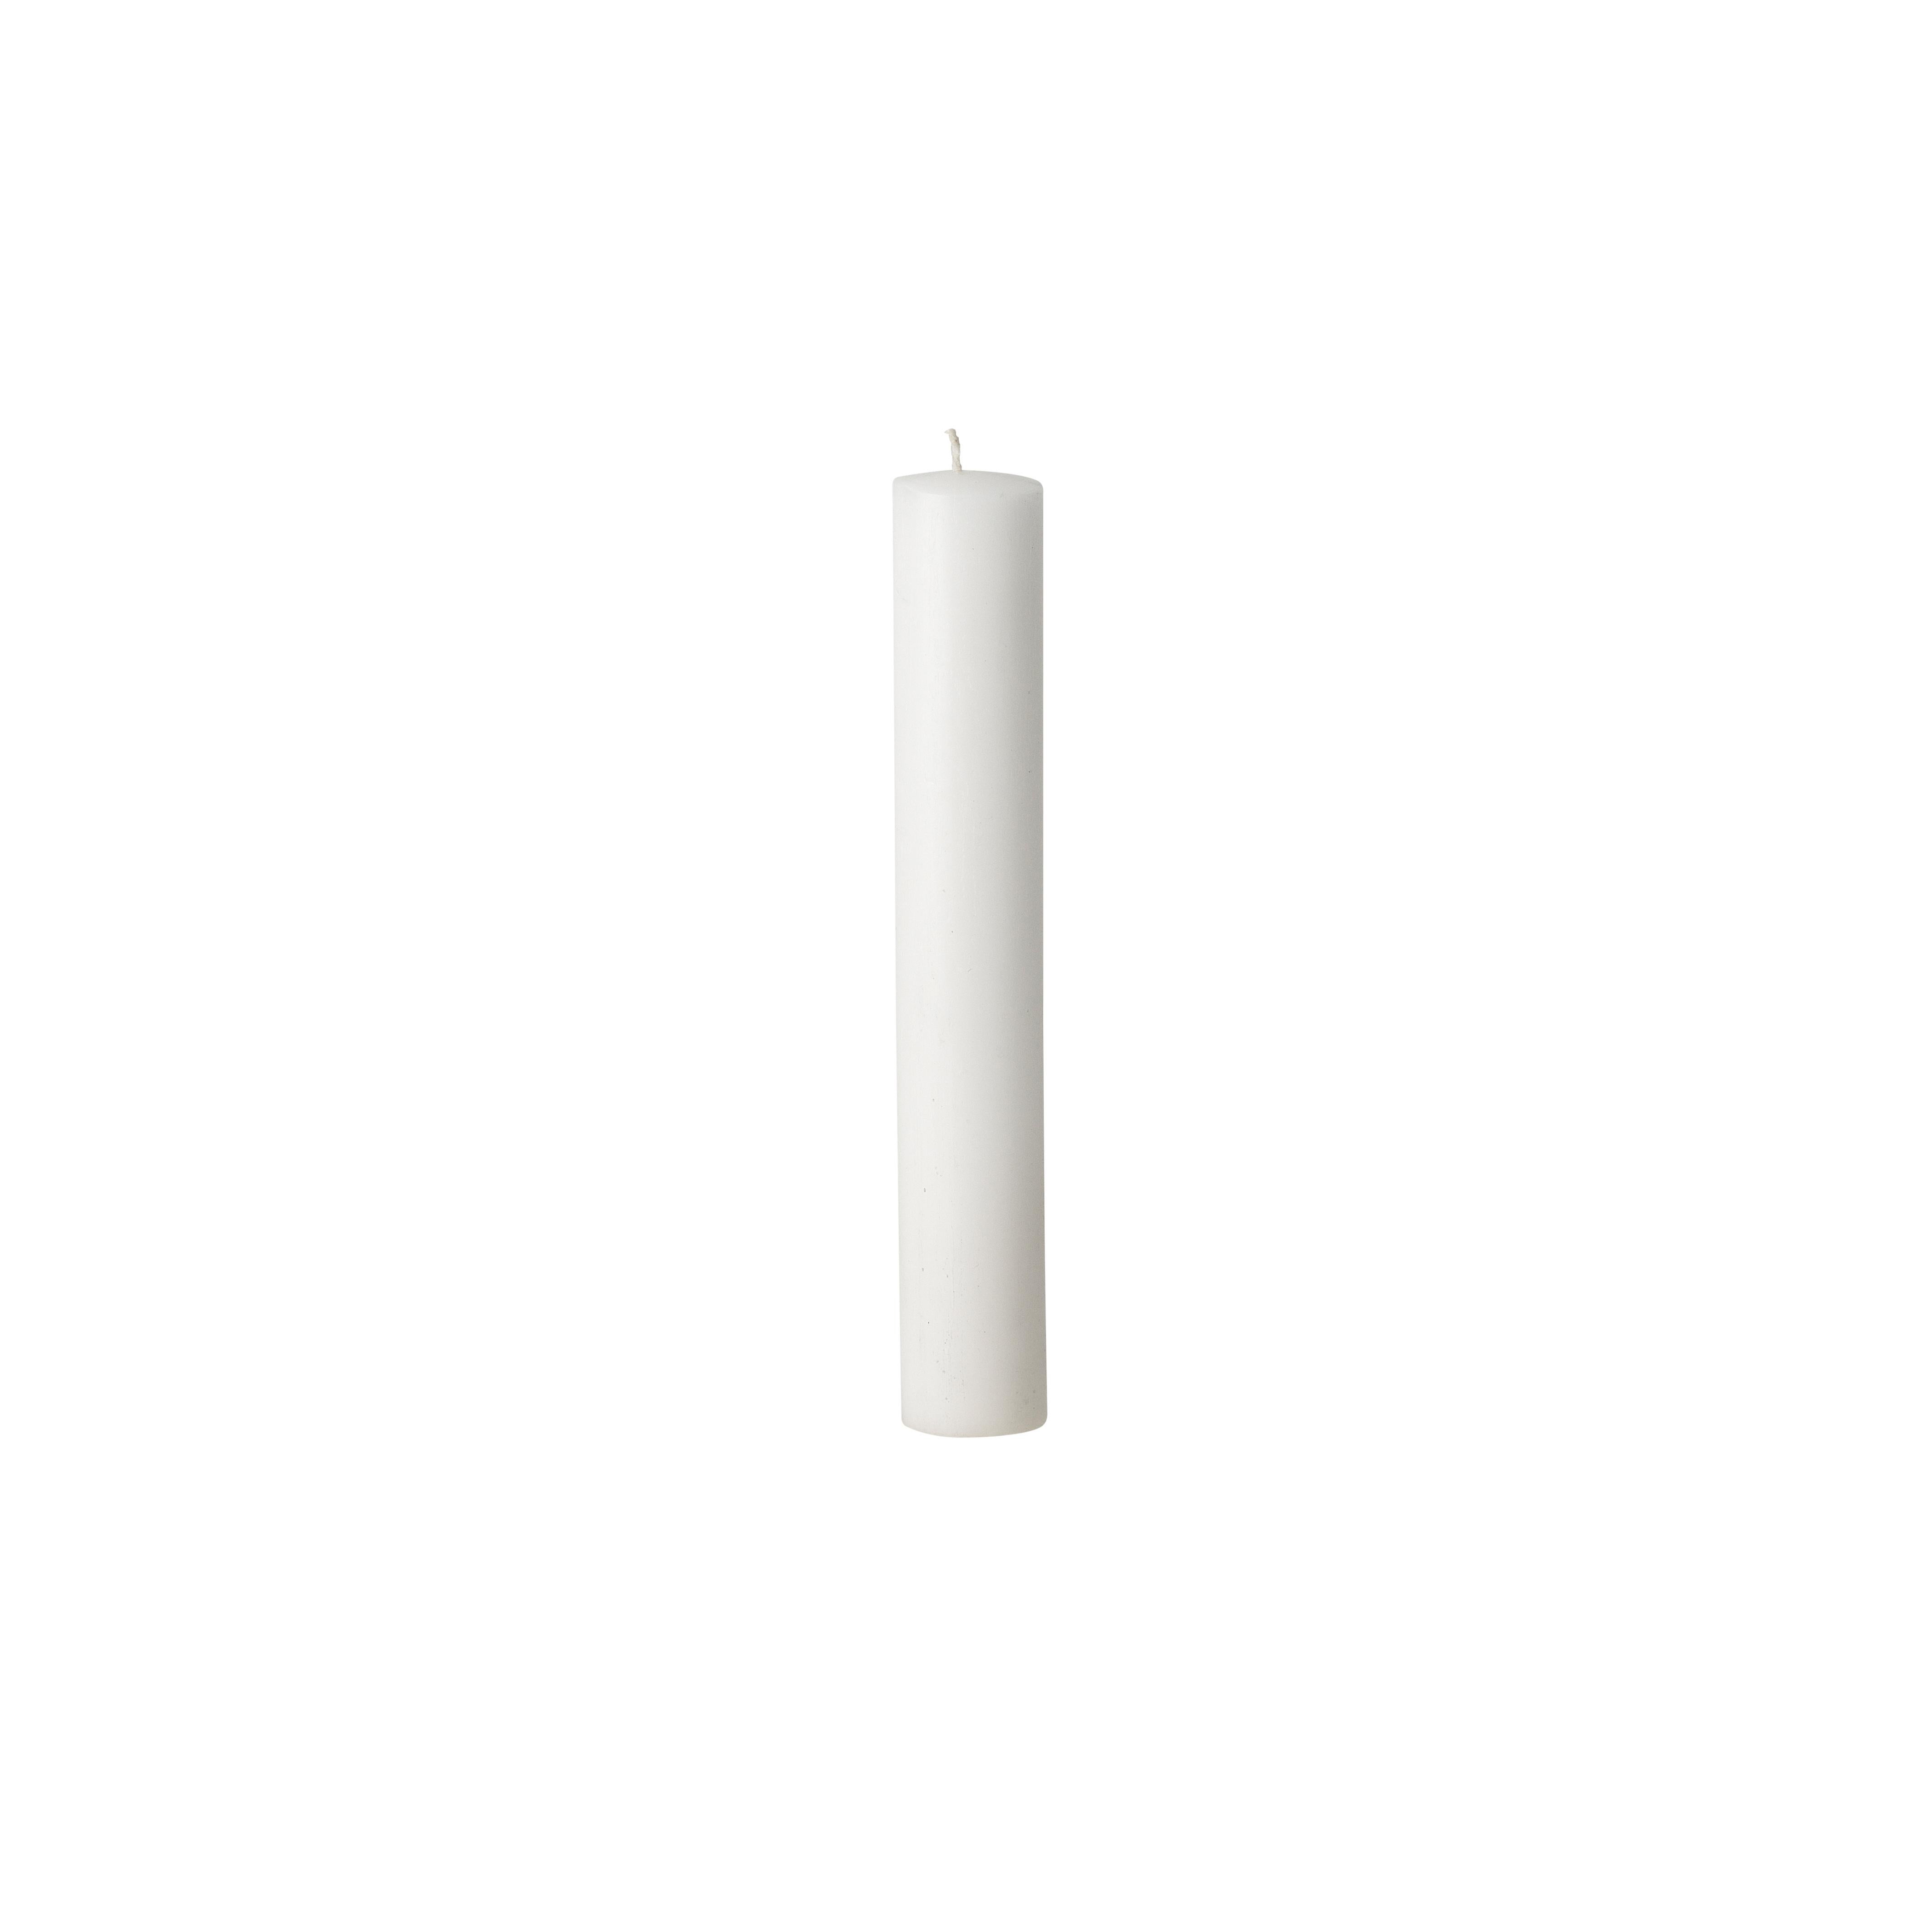 Ghidini 1961 There 'Push Pin' Candlestick in Wax by Studio Job